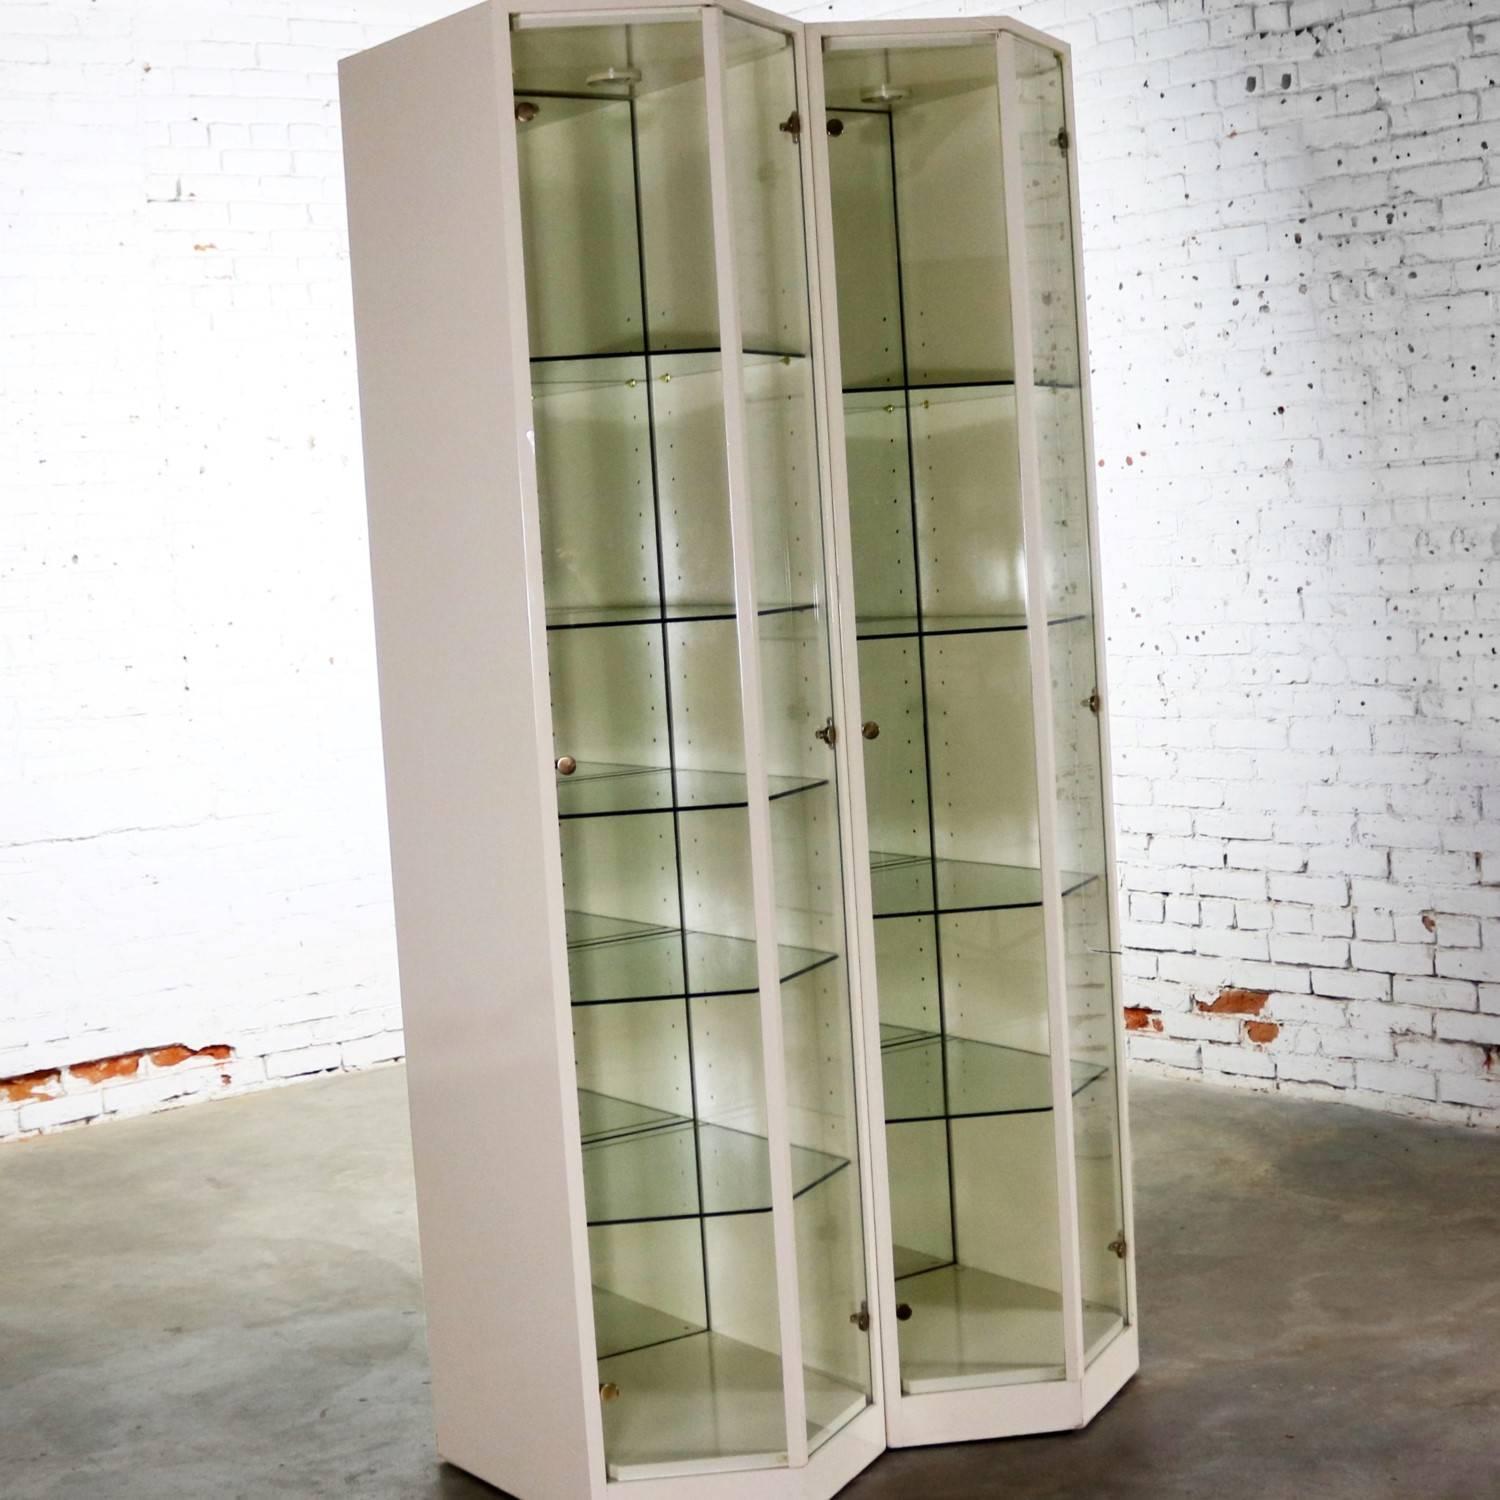 Extraordinary pair of modern ivory colored lacquer lighted full-view display cabinets with V shaped glass fronts and mirrored backs. Possibly Italian made, they are in wonderful vintage condition. There are small nicks to the very bottom of the base